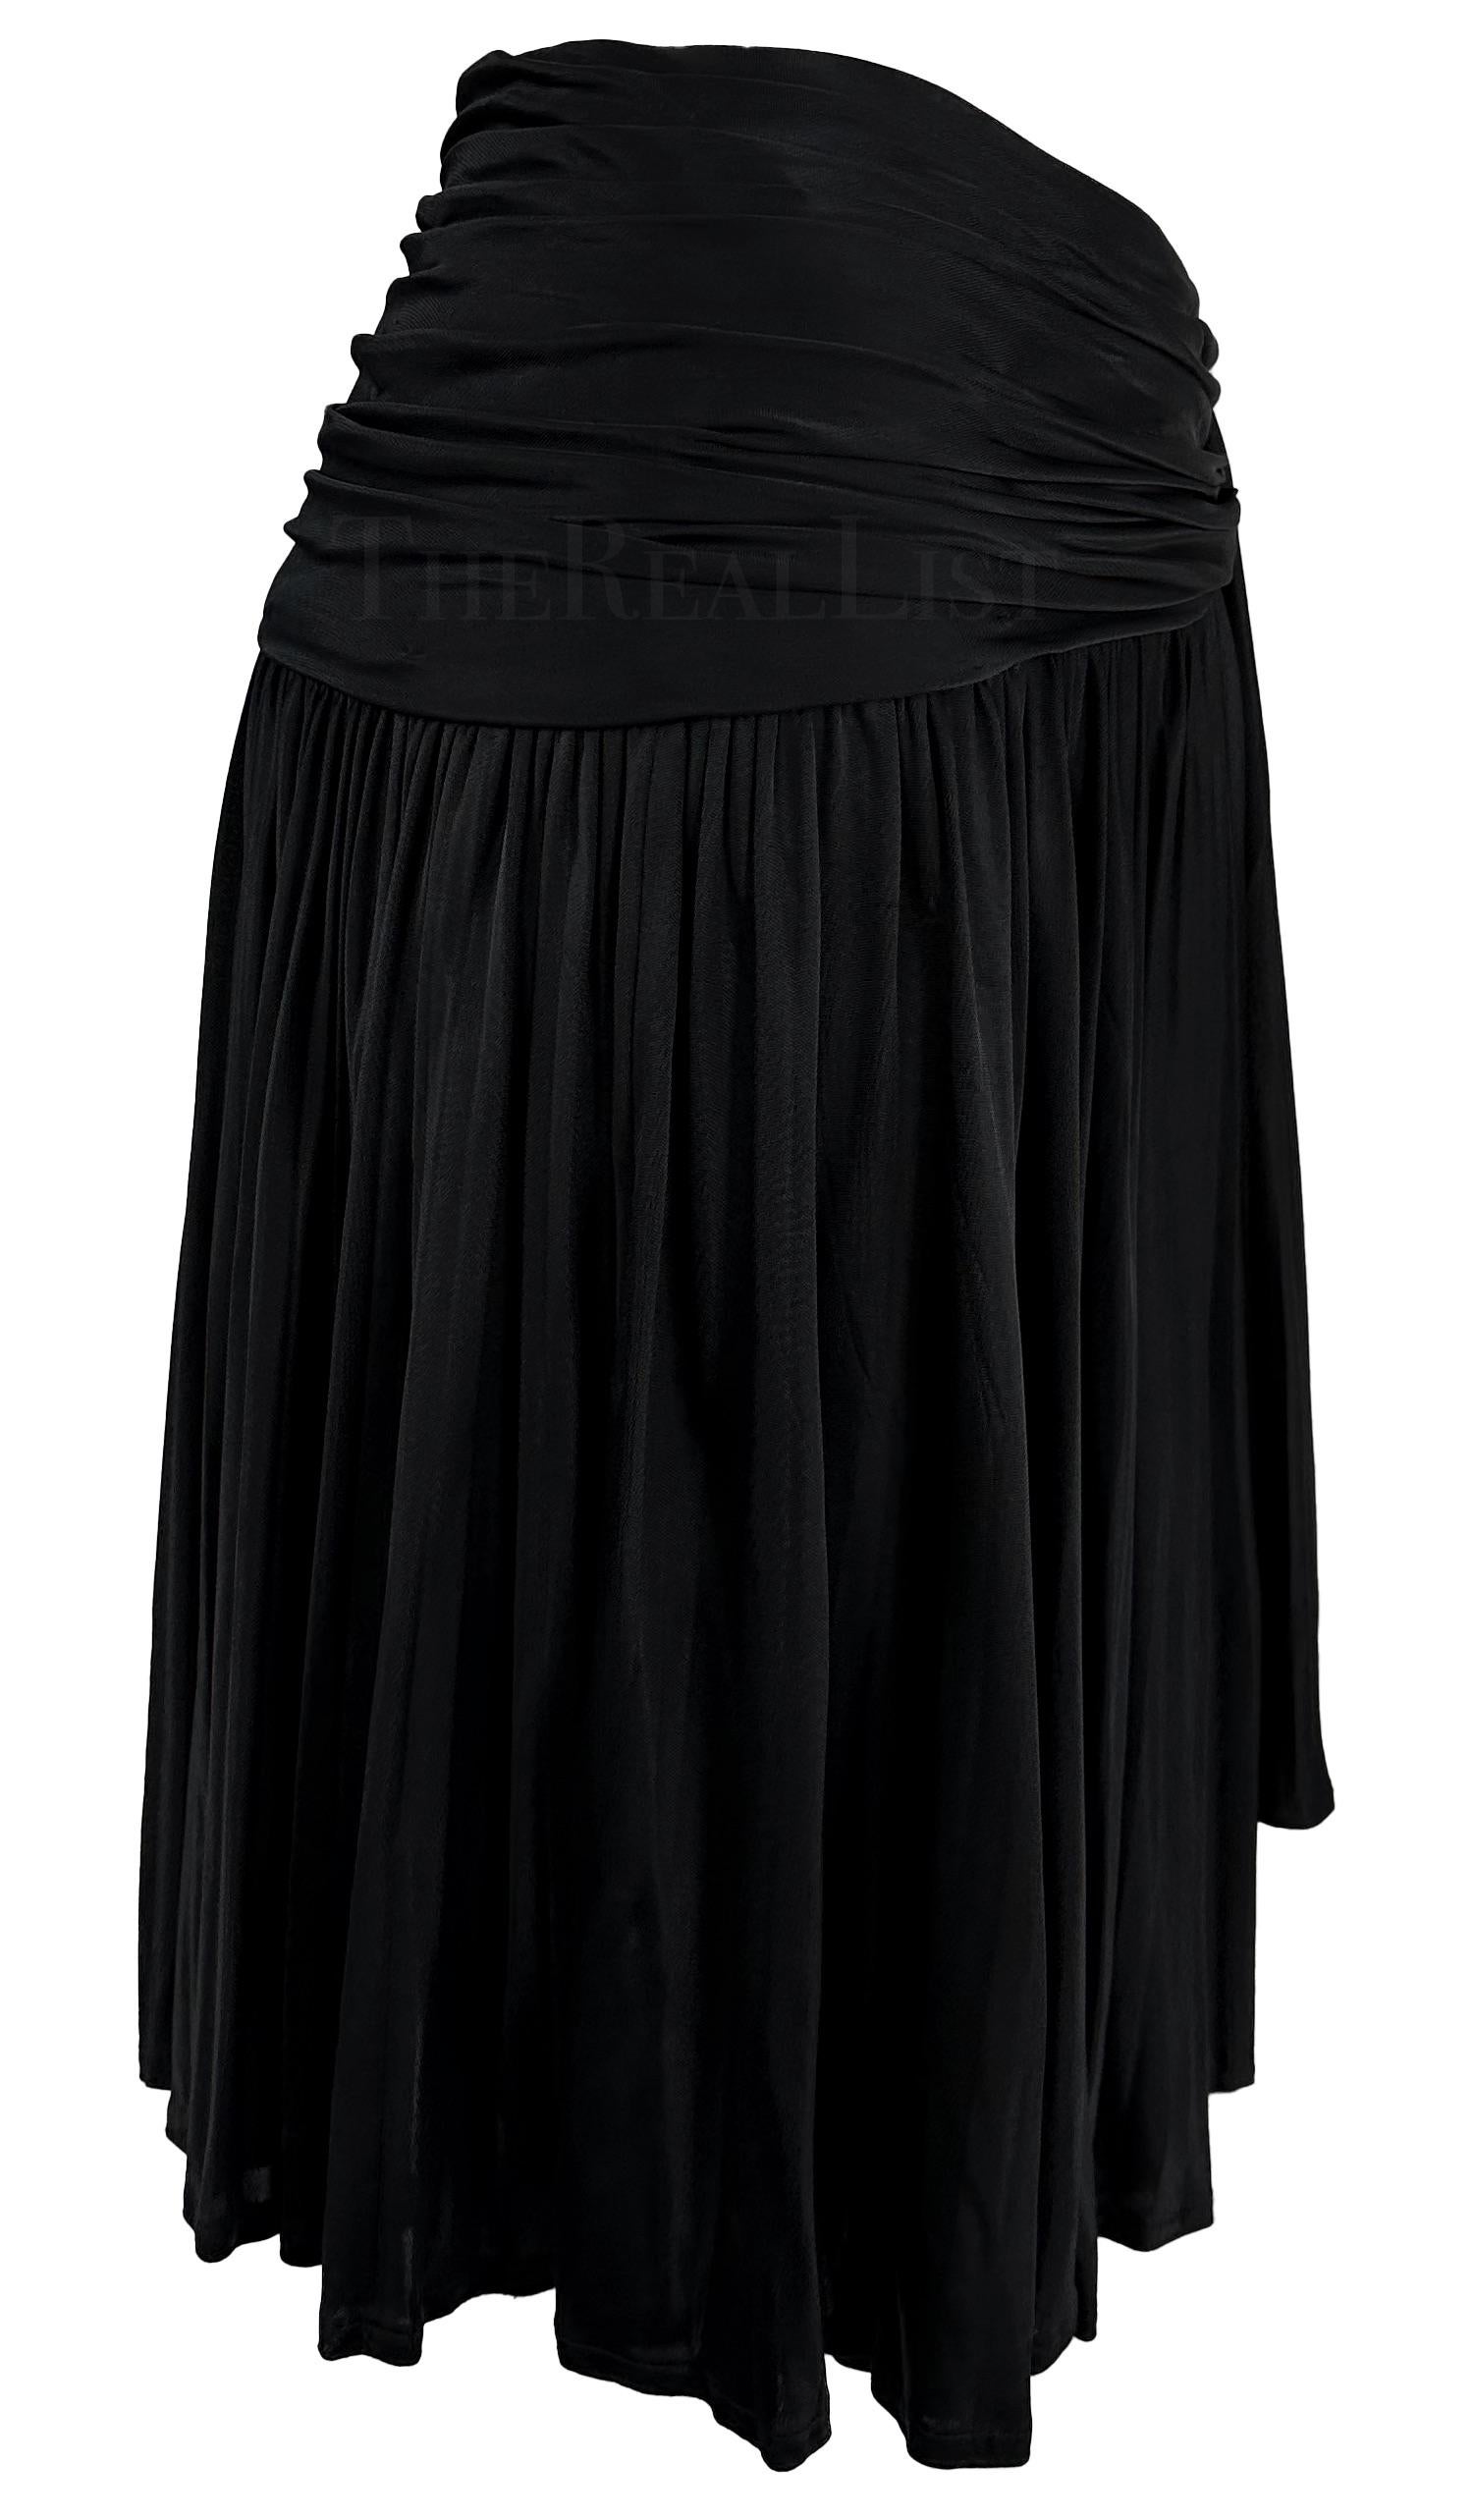 S/S 1995 Gianni Versace Black Pleated Faux Wrap Flare Skirt For Sale 1